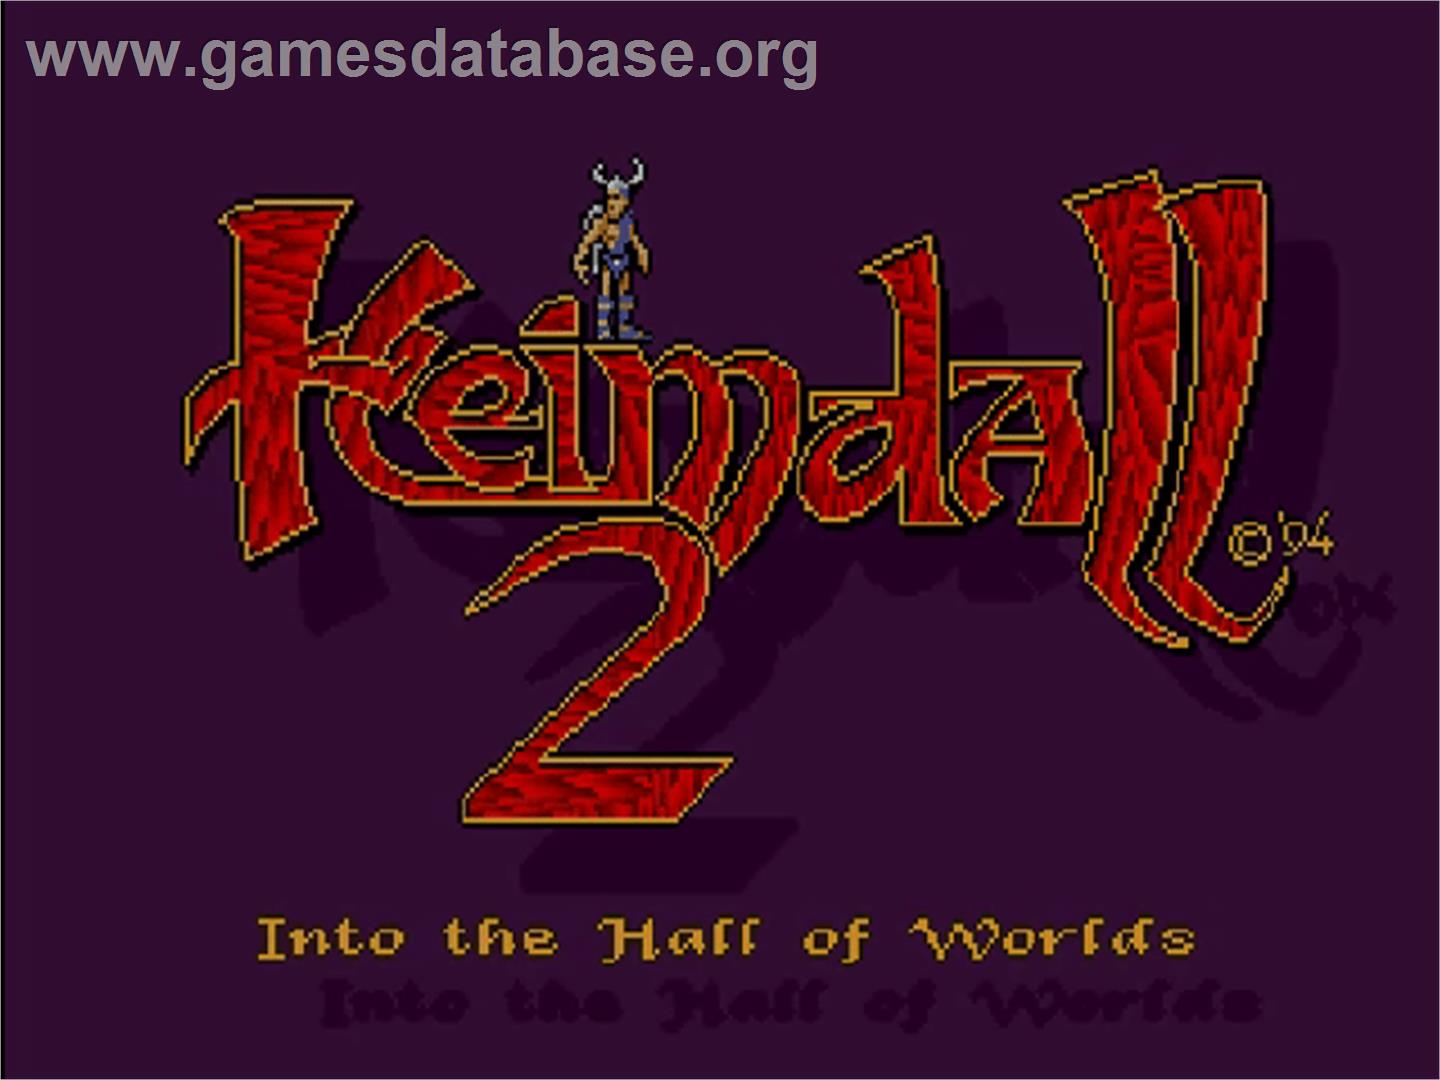 Heimdall 2: Into the Hall of Worlds - Commodore Amiga CD32 - Artwork - Title Screen